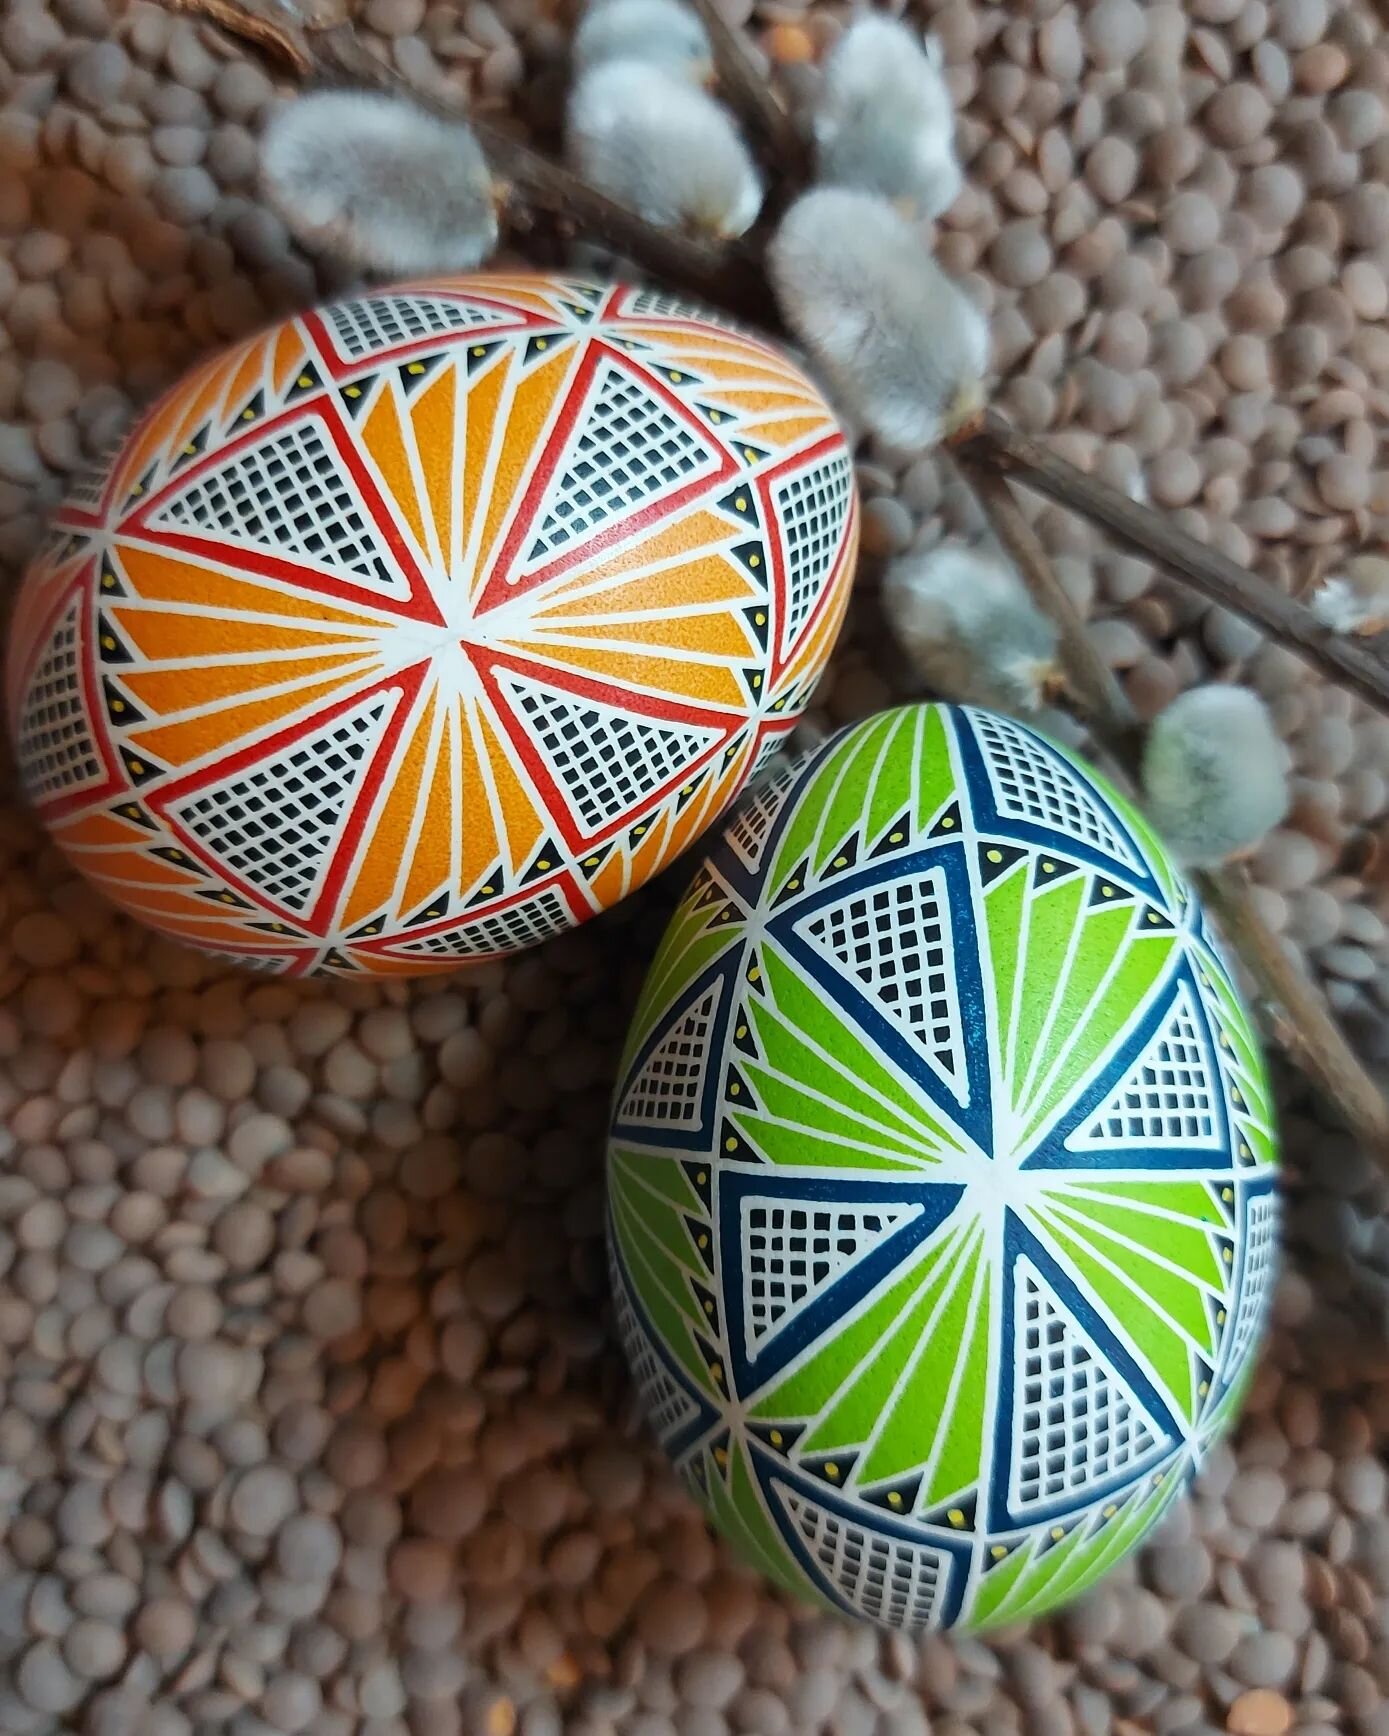 2023 pysanky for my boys. ❤️
Alike, but different... just like them. One is a bit spicy and thinks outside the box, the other is loyal and traditional. Both are sweet, kind and loving, creative and gentle. My pride &amp; joy.💙💛
Photos from 2016 &am